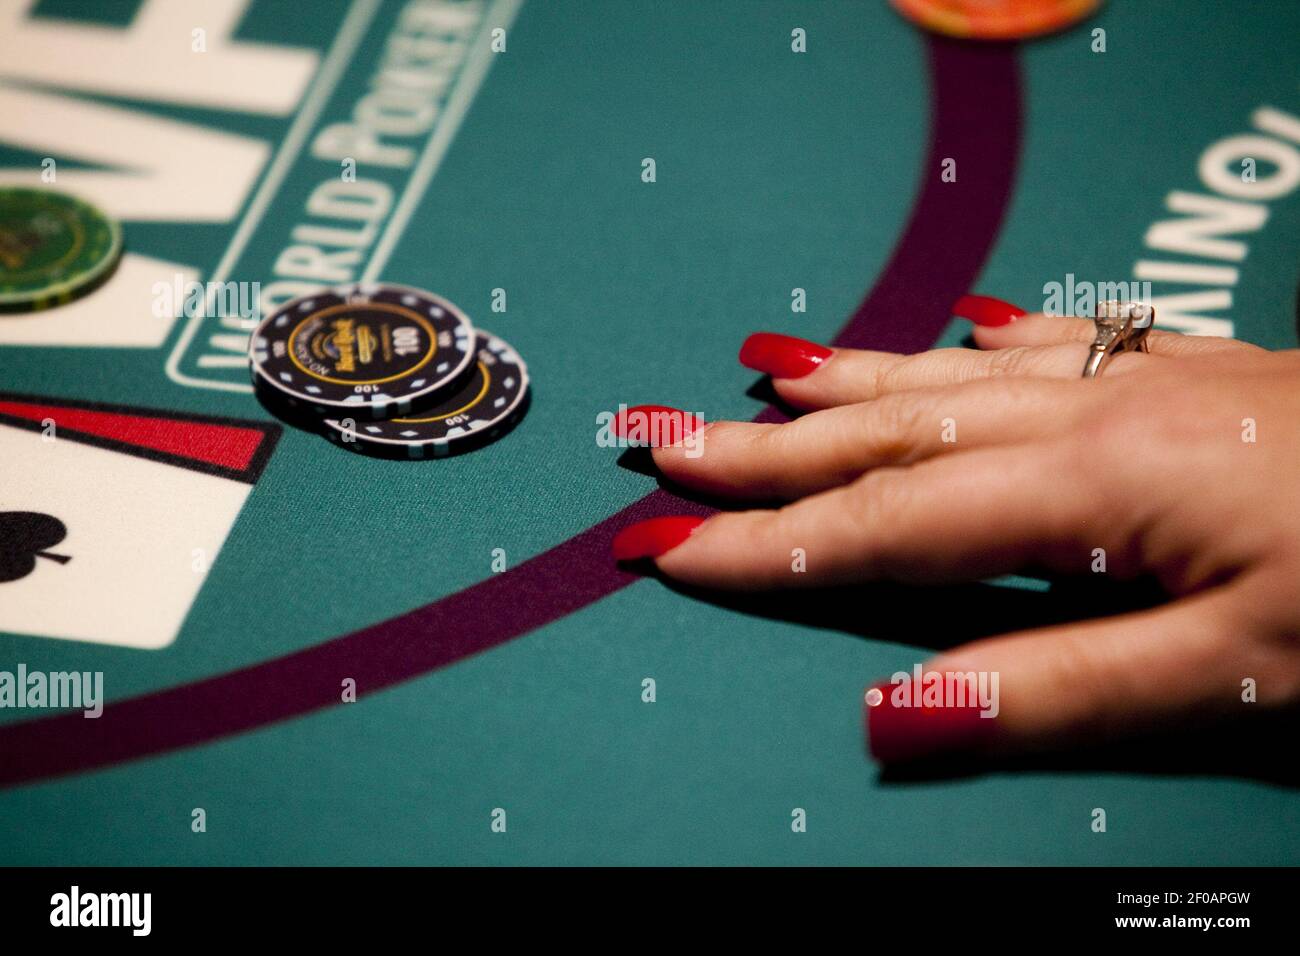 Lauren Failla, president and CEO of High Heels Poker, INC, waits for cards  to be dealt at the Inaugural Michael "The Grinder" Charity Poker Tournament  at the Seminole Hard Rock Hotel and